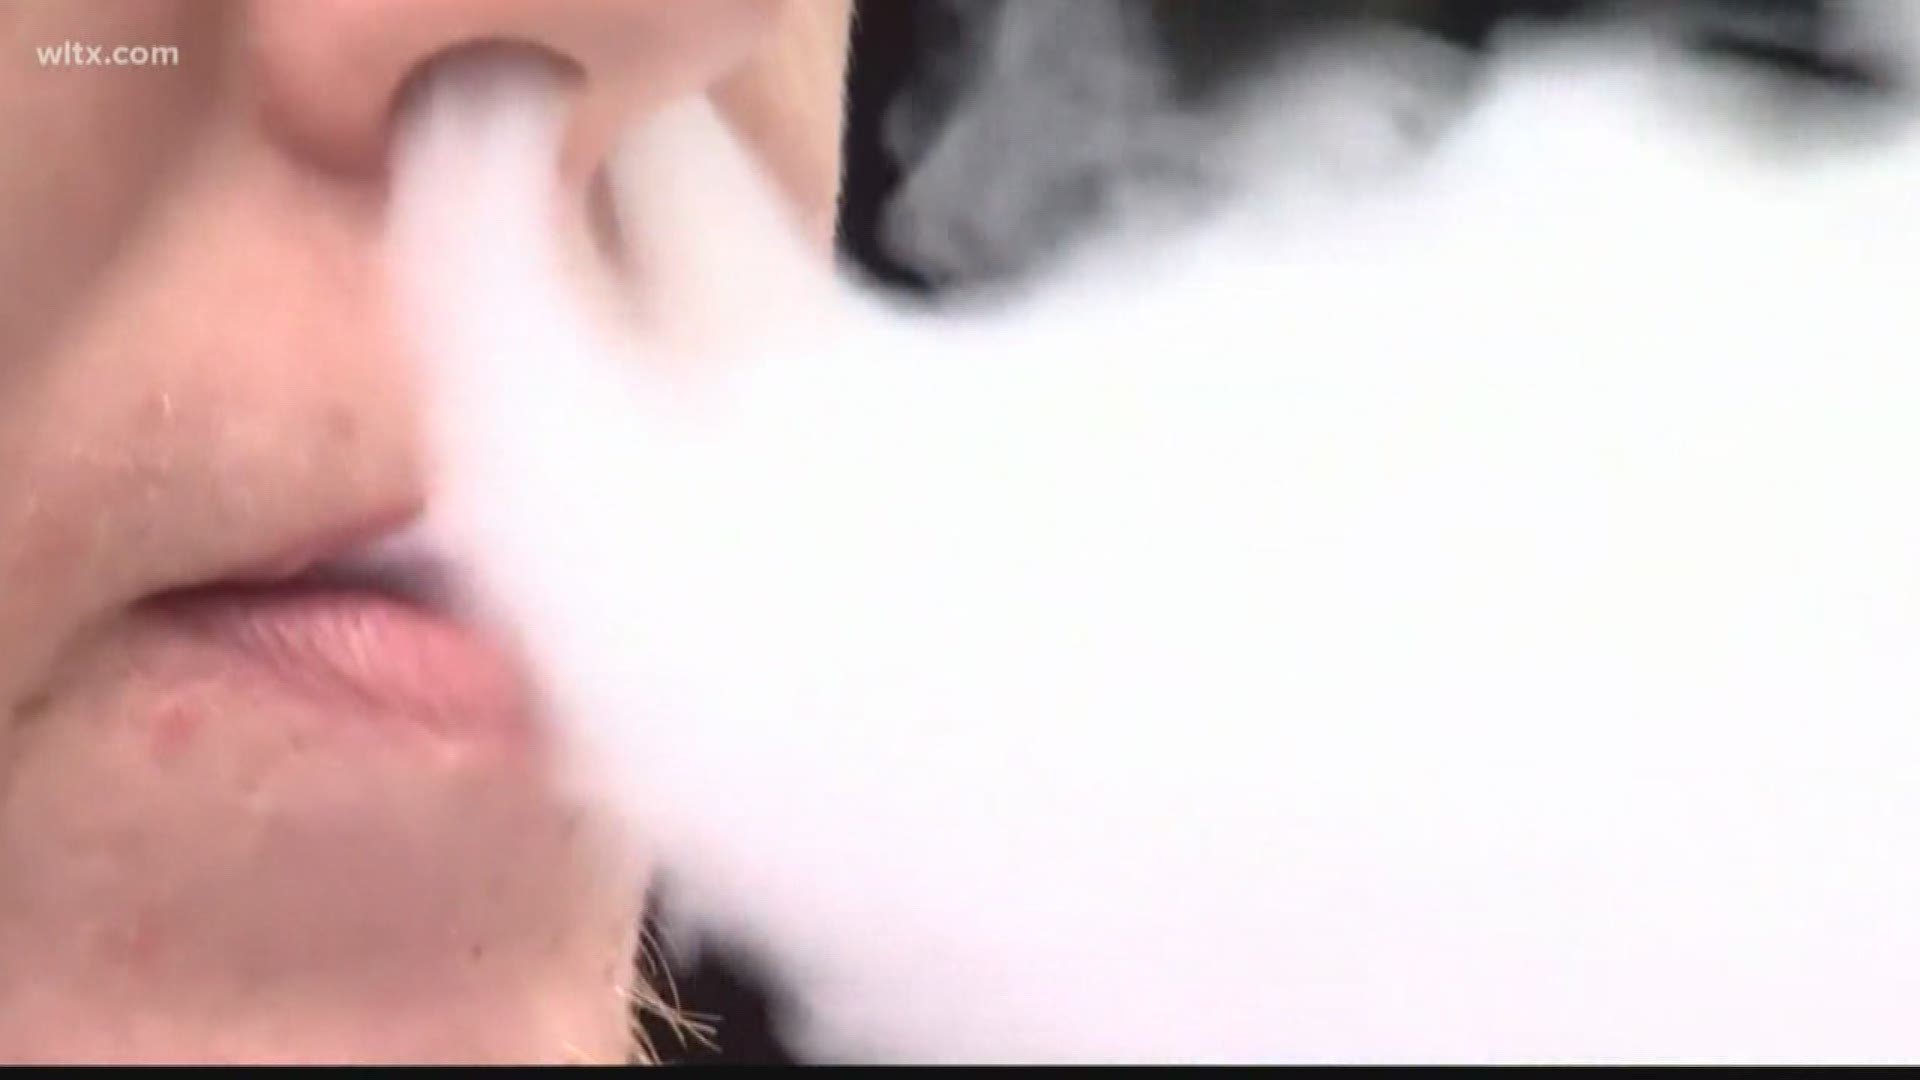 South Carolina health officials are confirming the first-ever vaping related death in South Carolina.